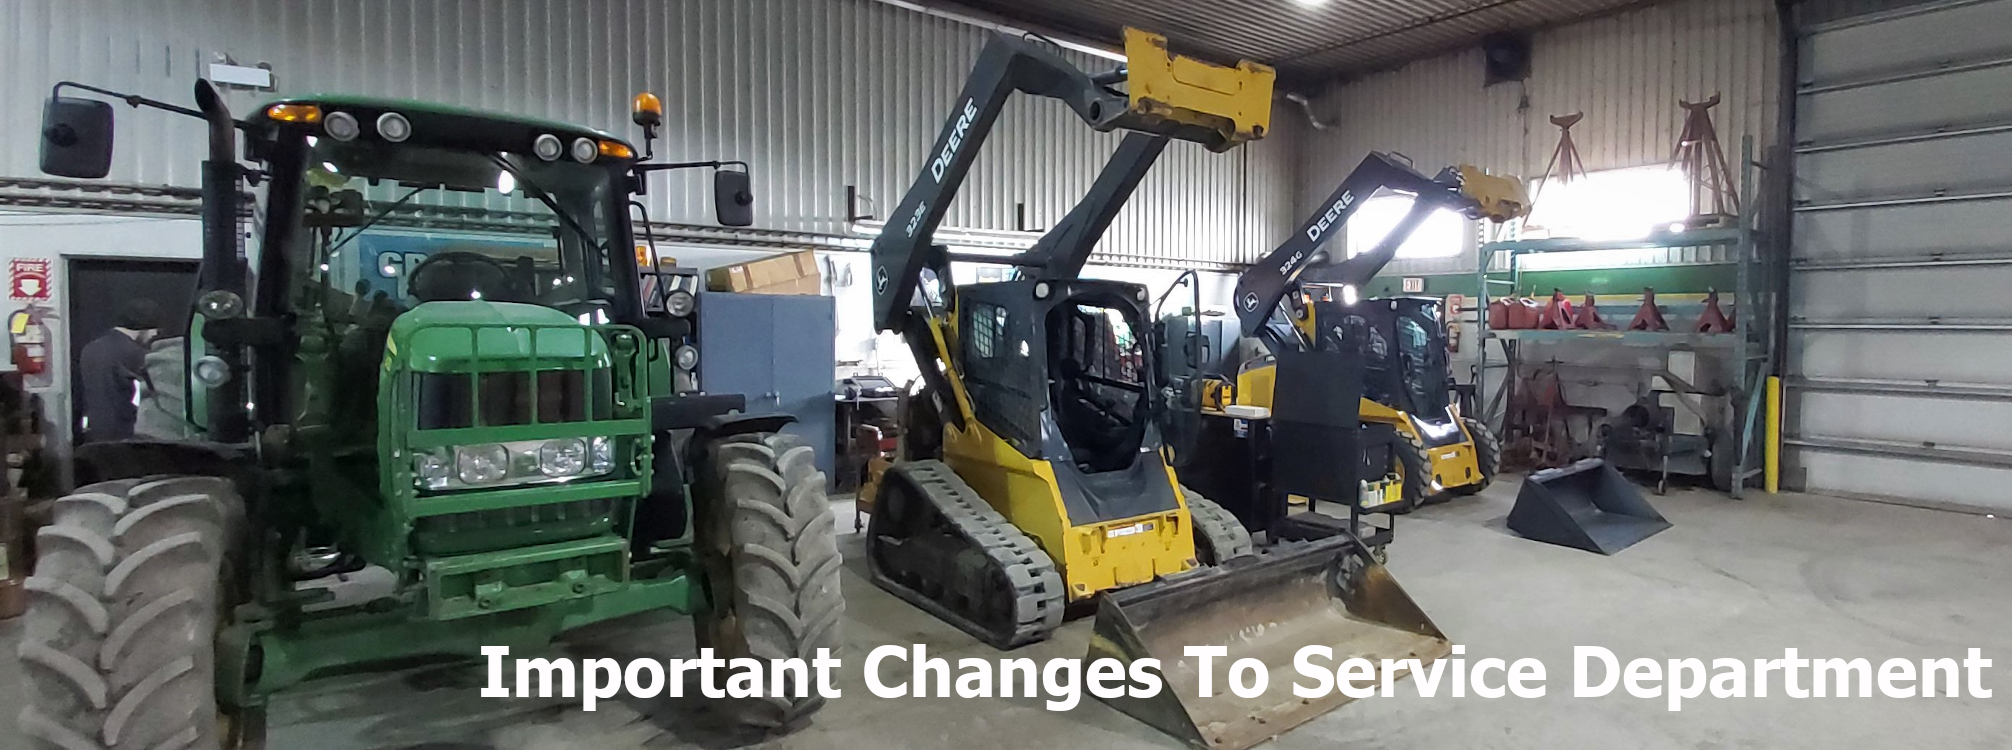 Important Changes To Service Department